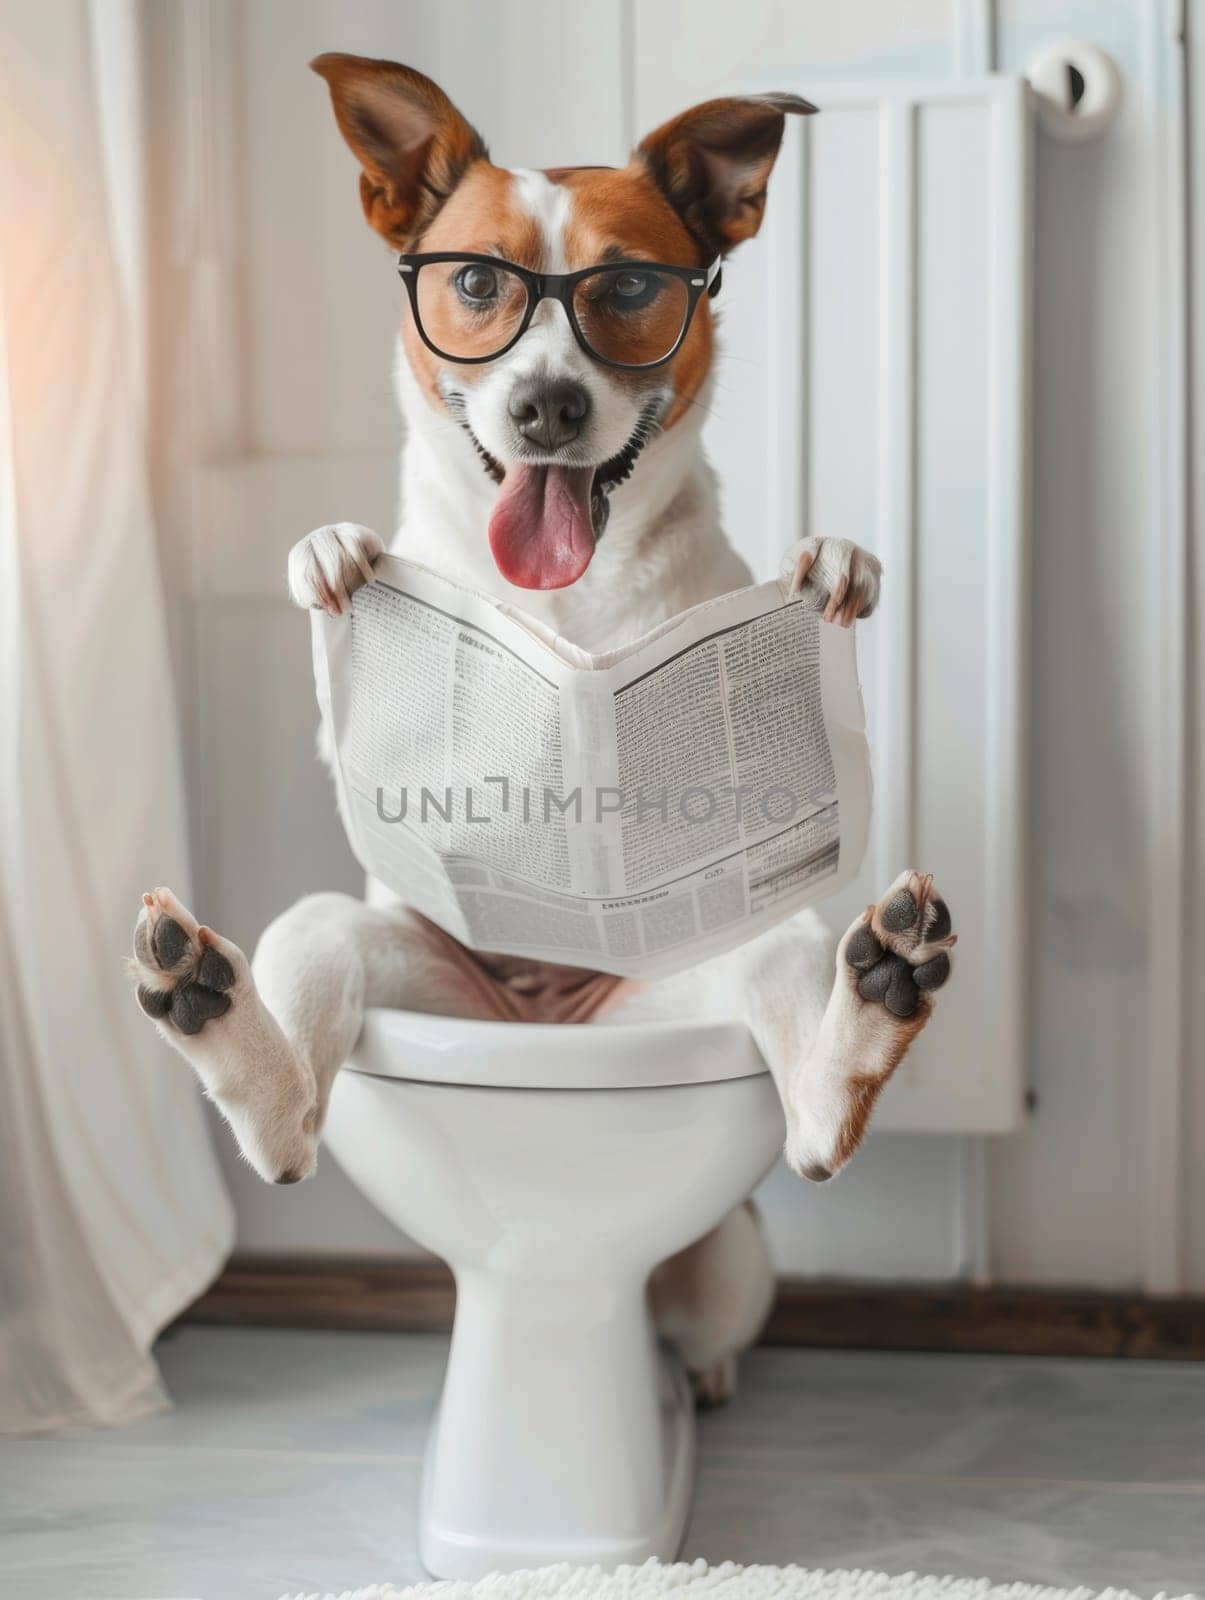 A dog is sitting on a toilet and holding a newspaper. The dog is wearing glasses and has a tongue sticking out. Concept of humor and playfulness